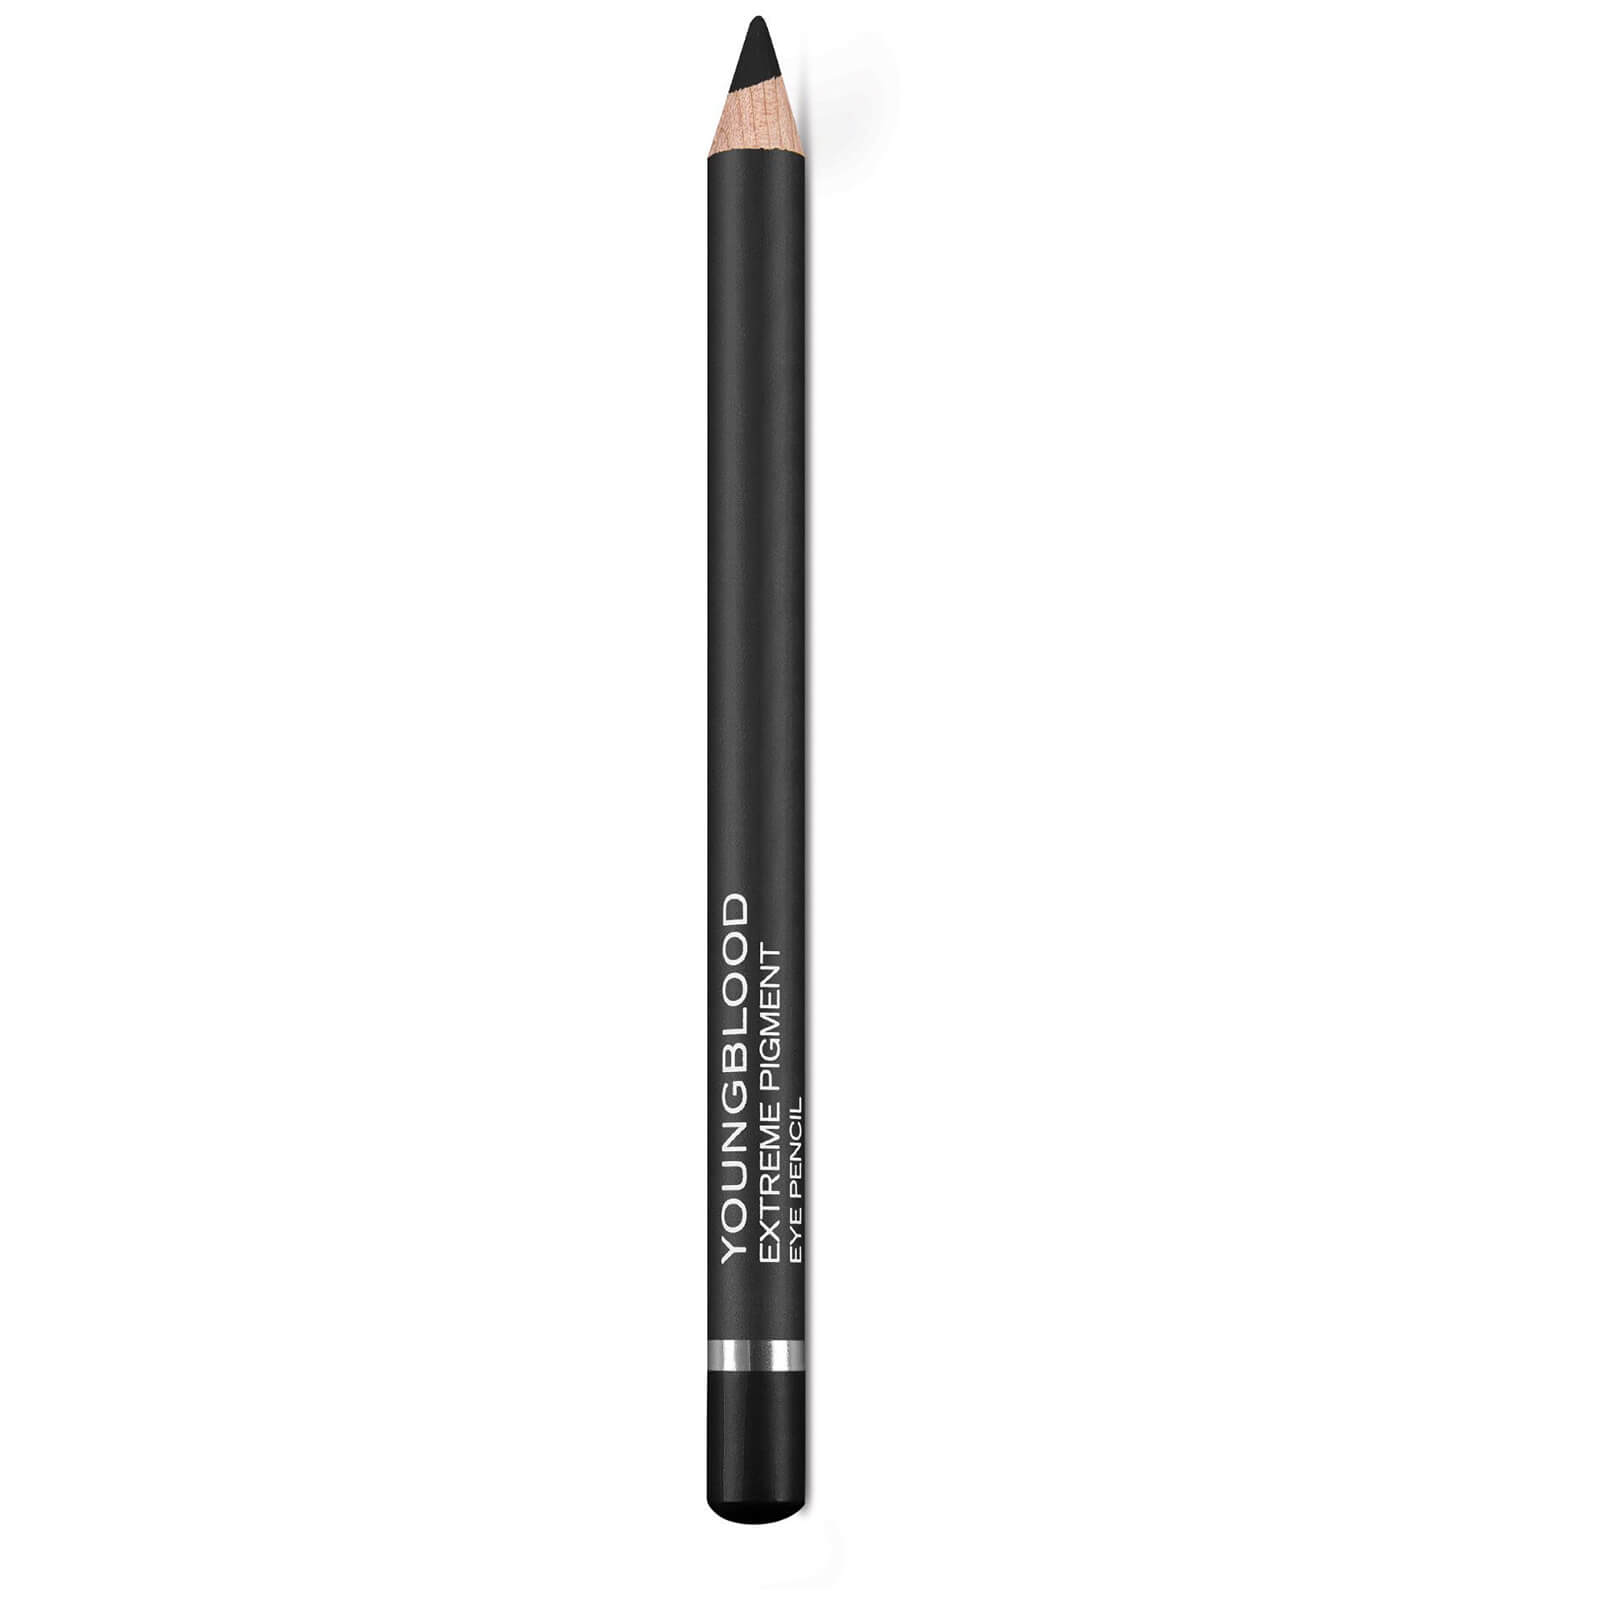 Youngblood Mineral Cosmetics Youngblood Eye Liner Pencil 1.1g (Various Shades) - Blackest Black